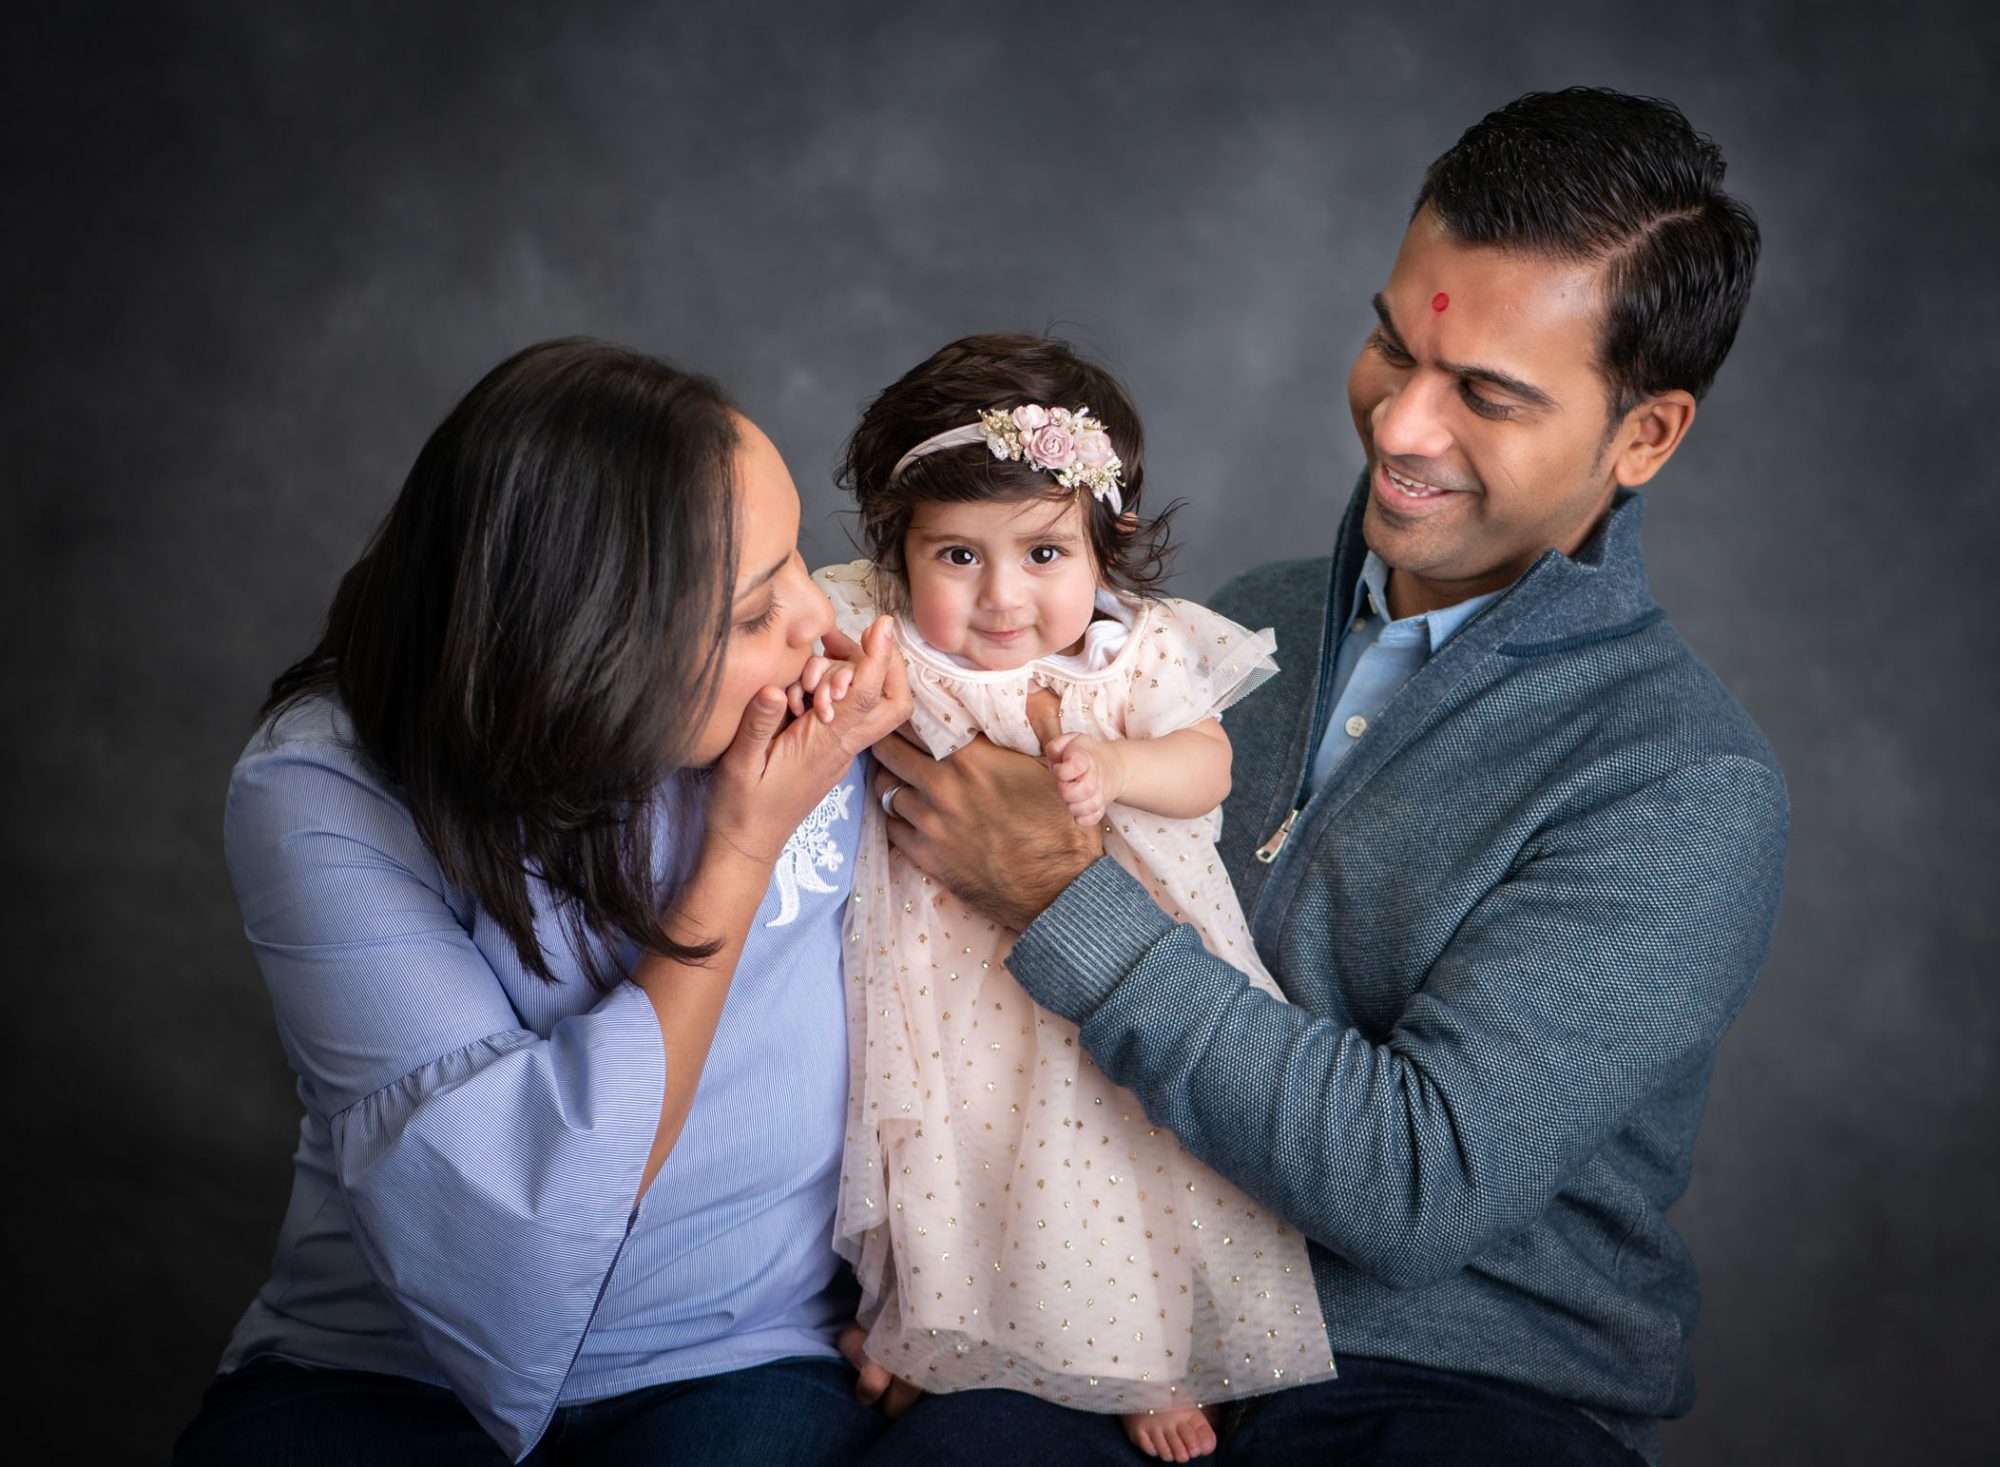 6 month session - baby photos in connecticut